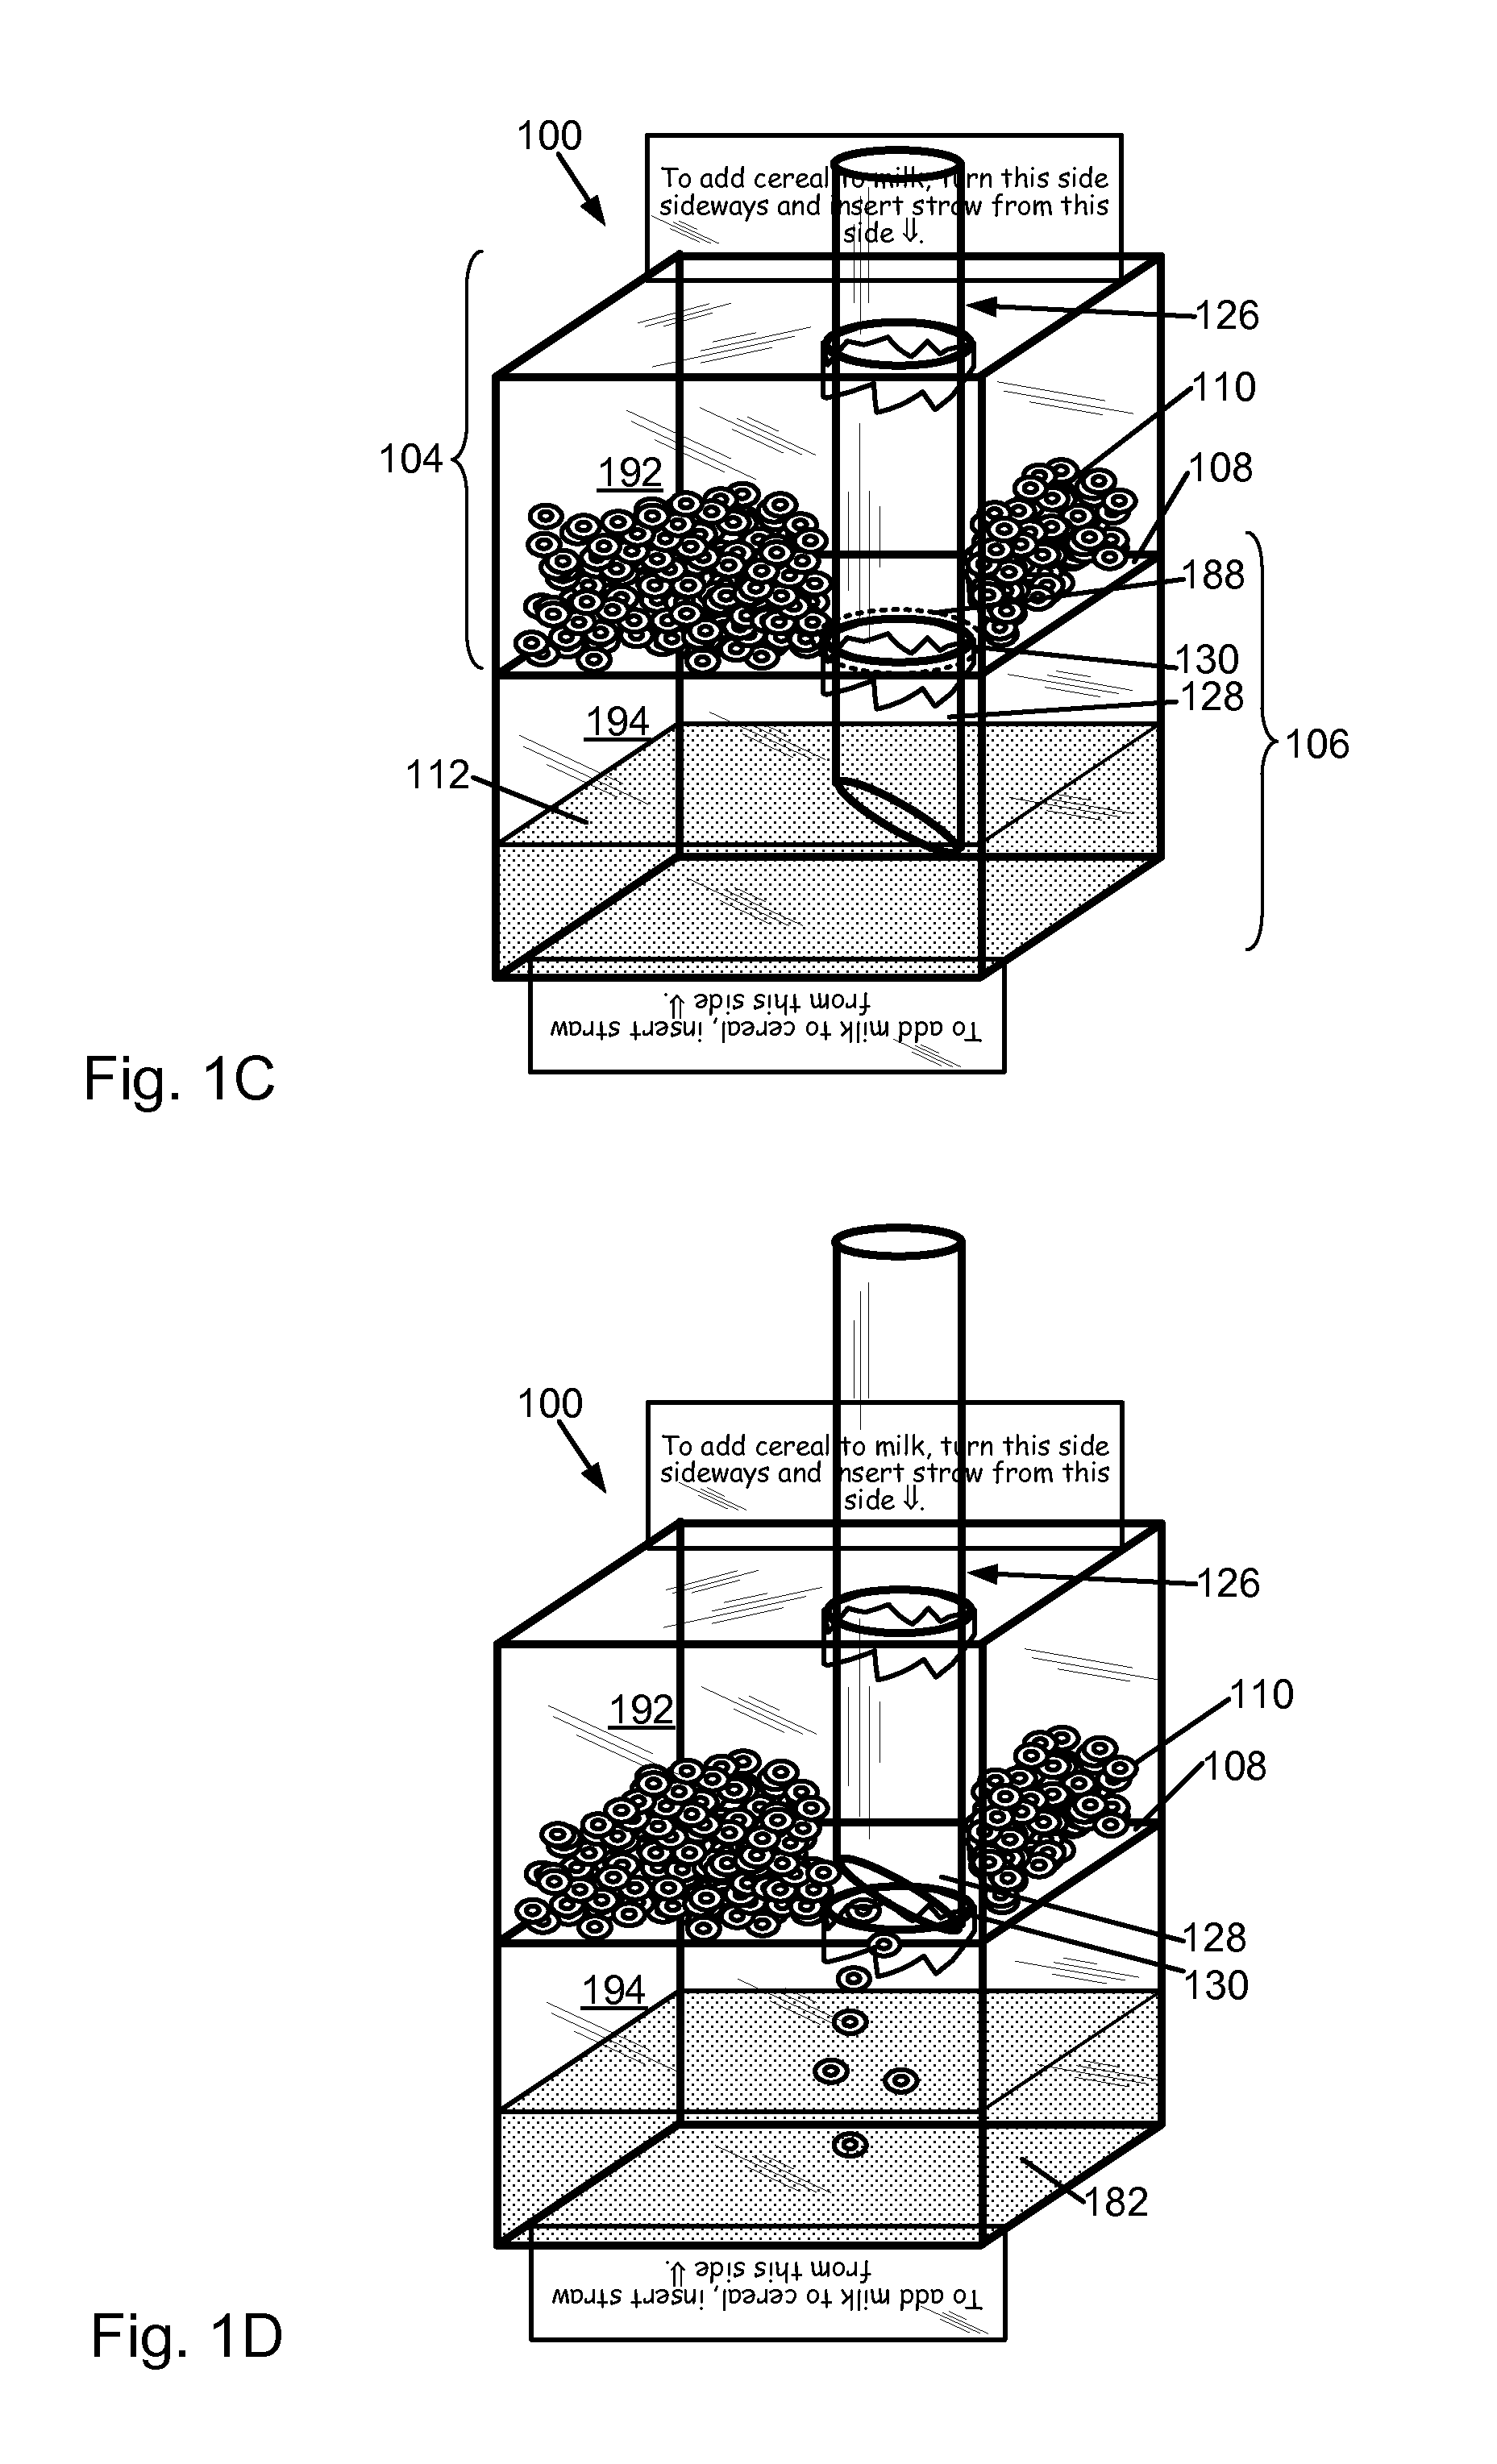 Systems and methods for facilitating intake of edible substances